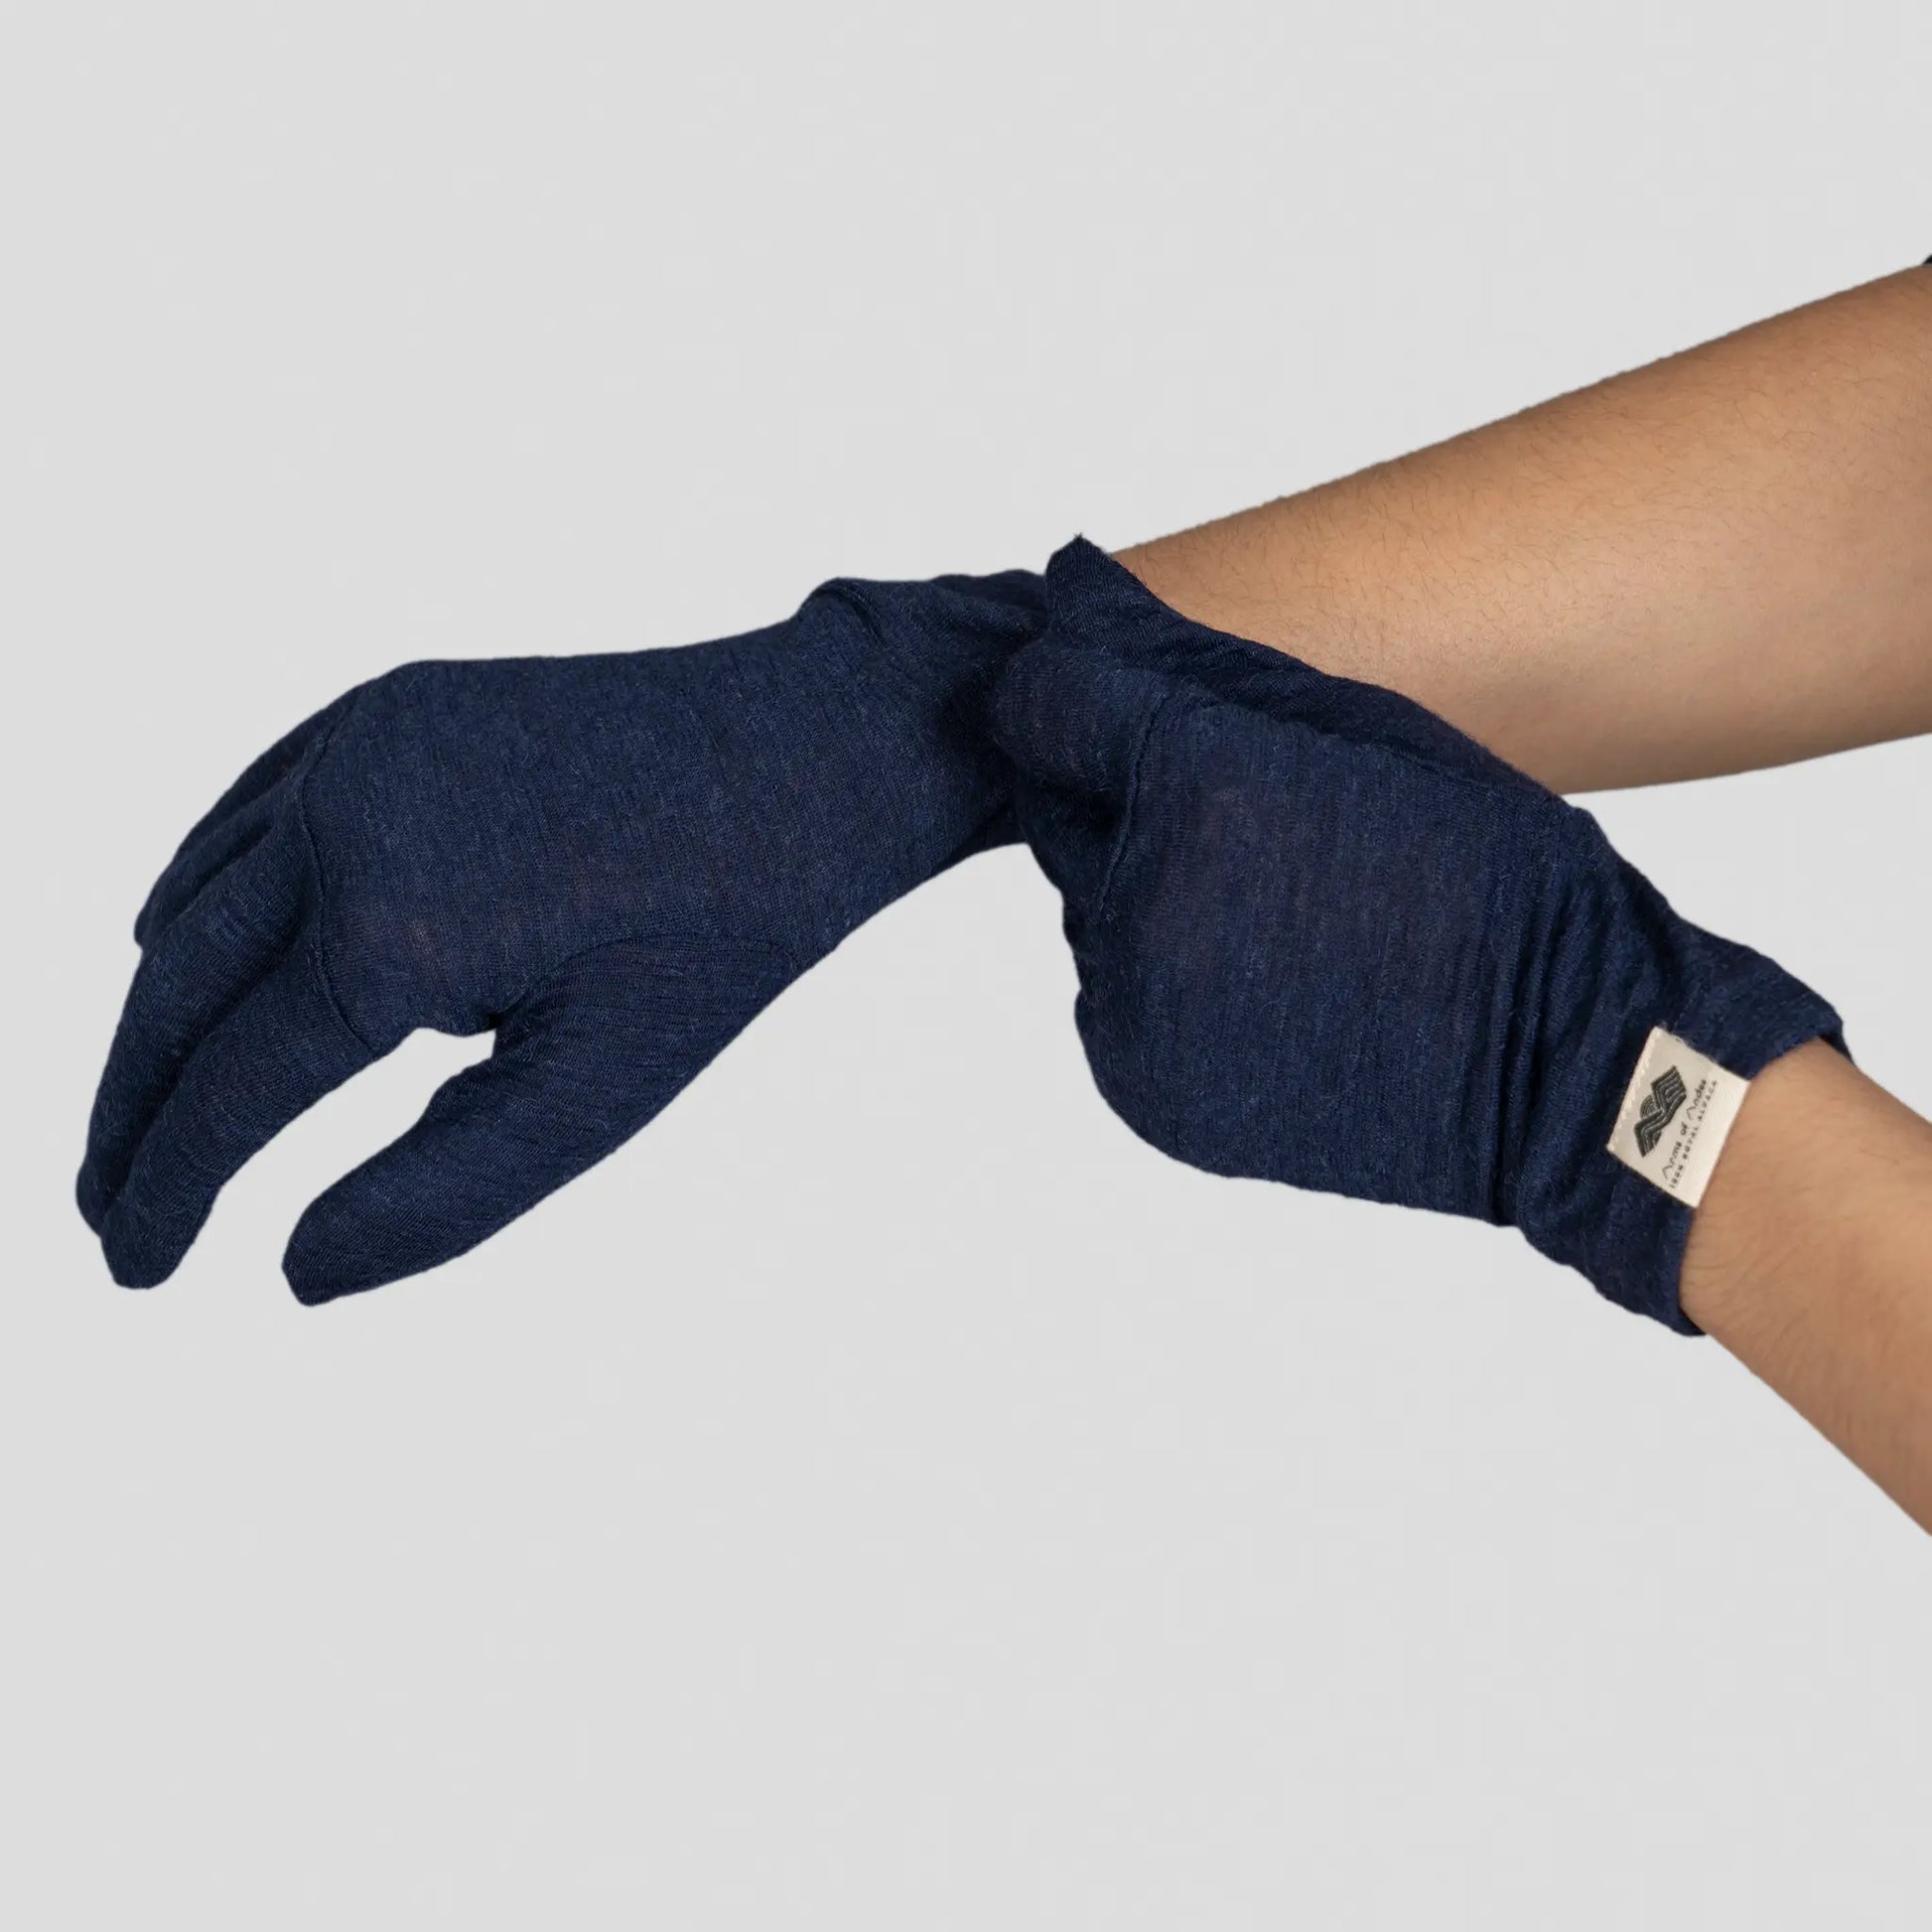 Unisex Alpaca Wool Glove Liners: 110 Ultralight color Natural Gray